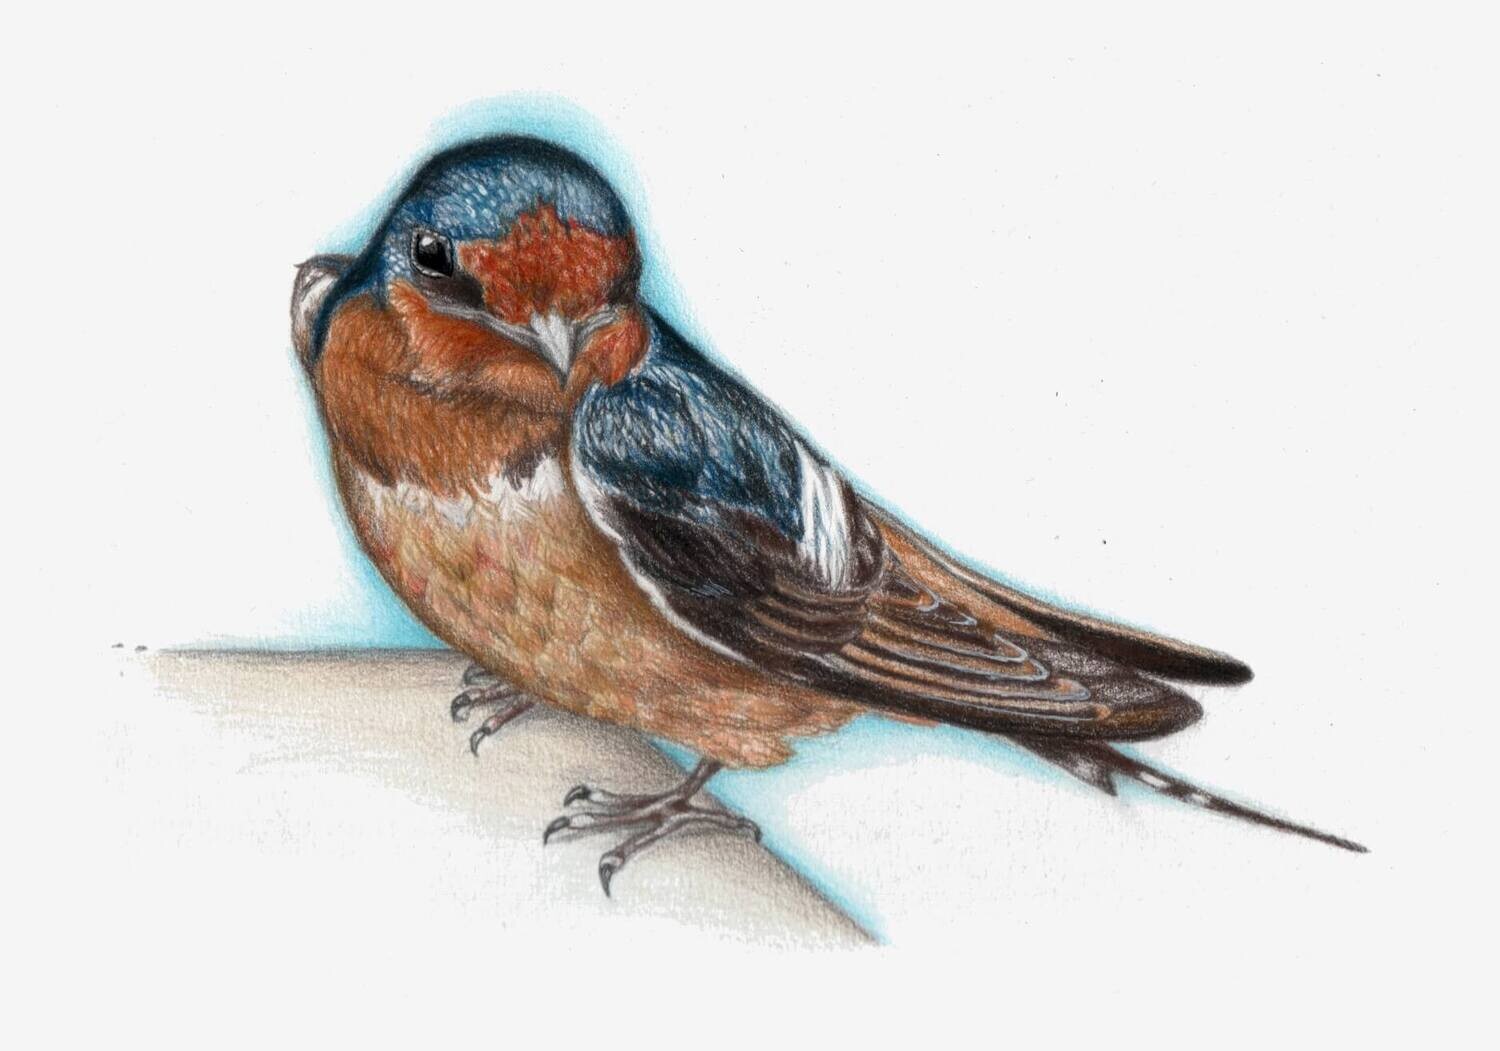 "Barn Swallow" - Greeting Cards (5x4 inches) hand-signed art cards $5 each